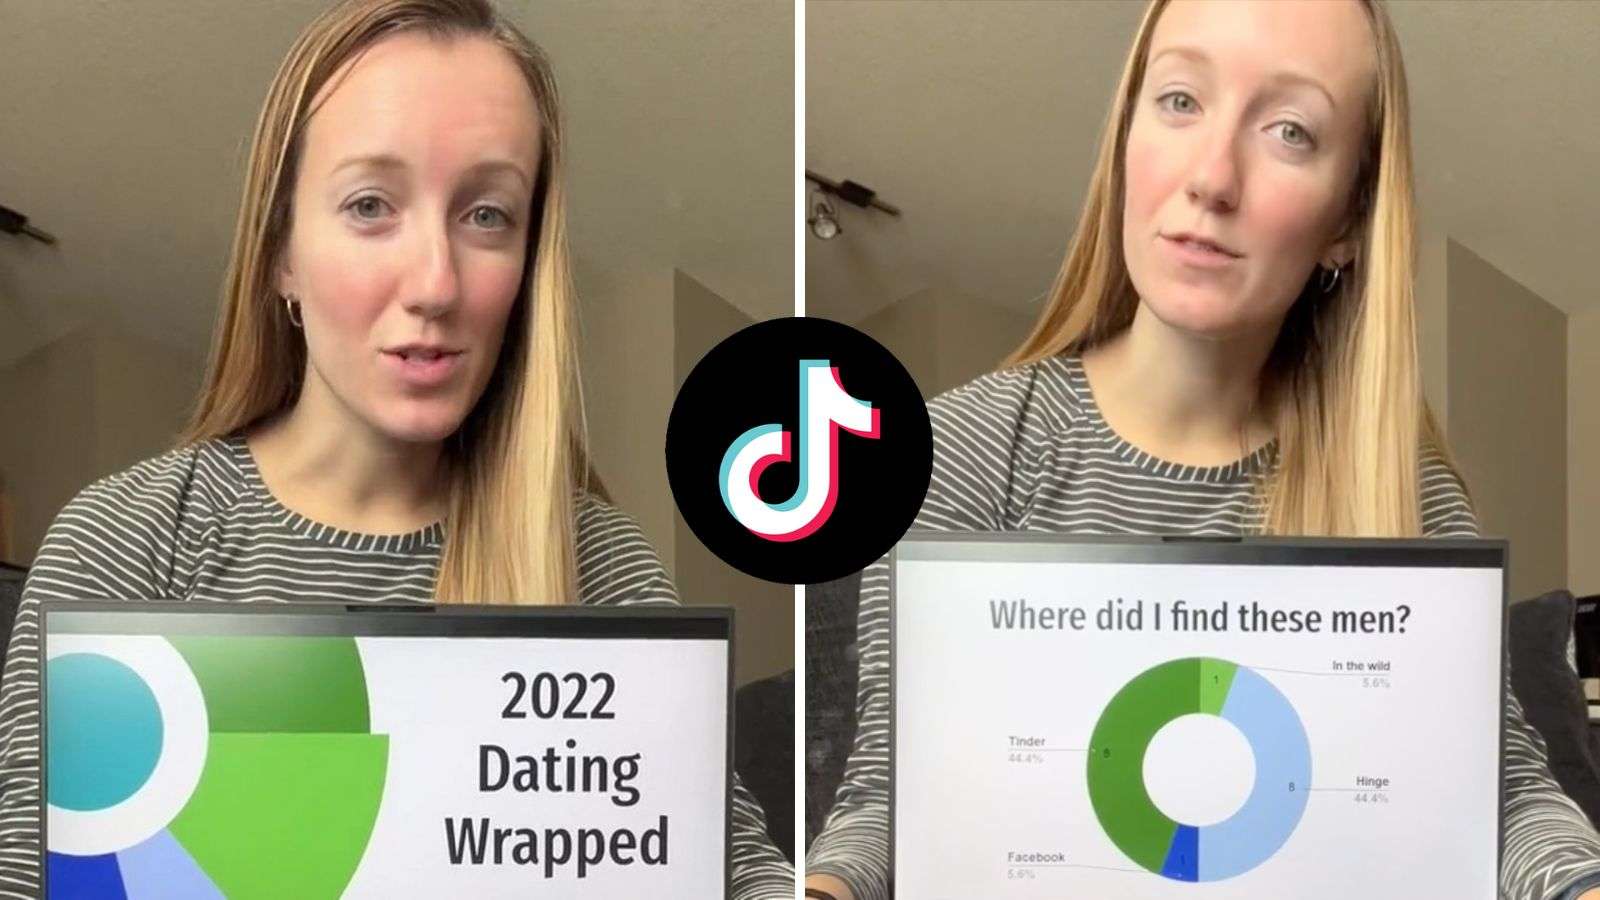 Woman shares genius “2022 Dating Wrapped” PowerPoint of her dating fails